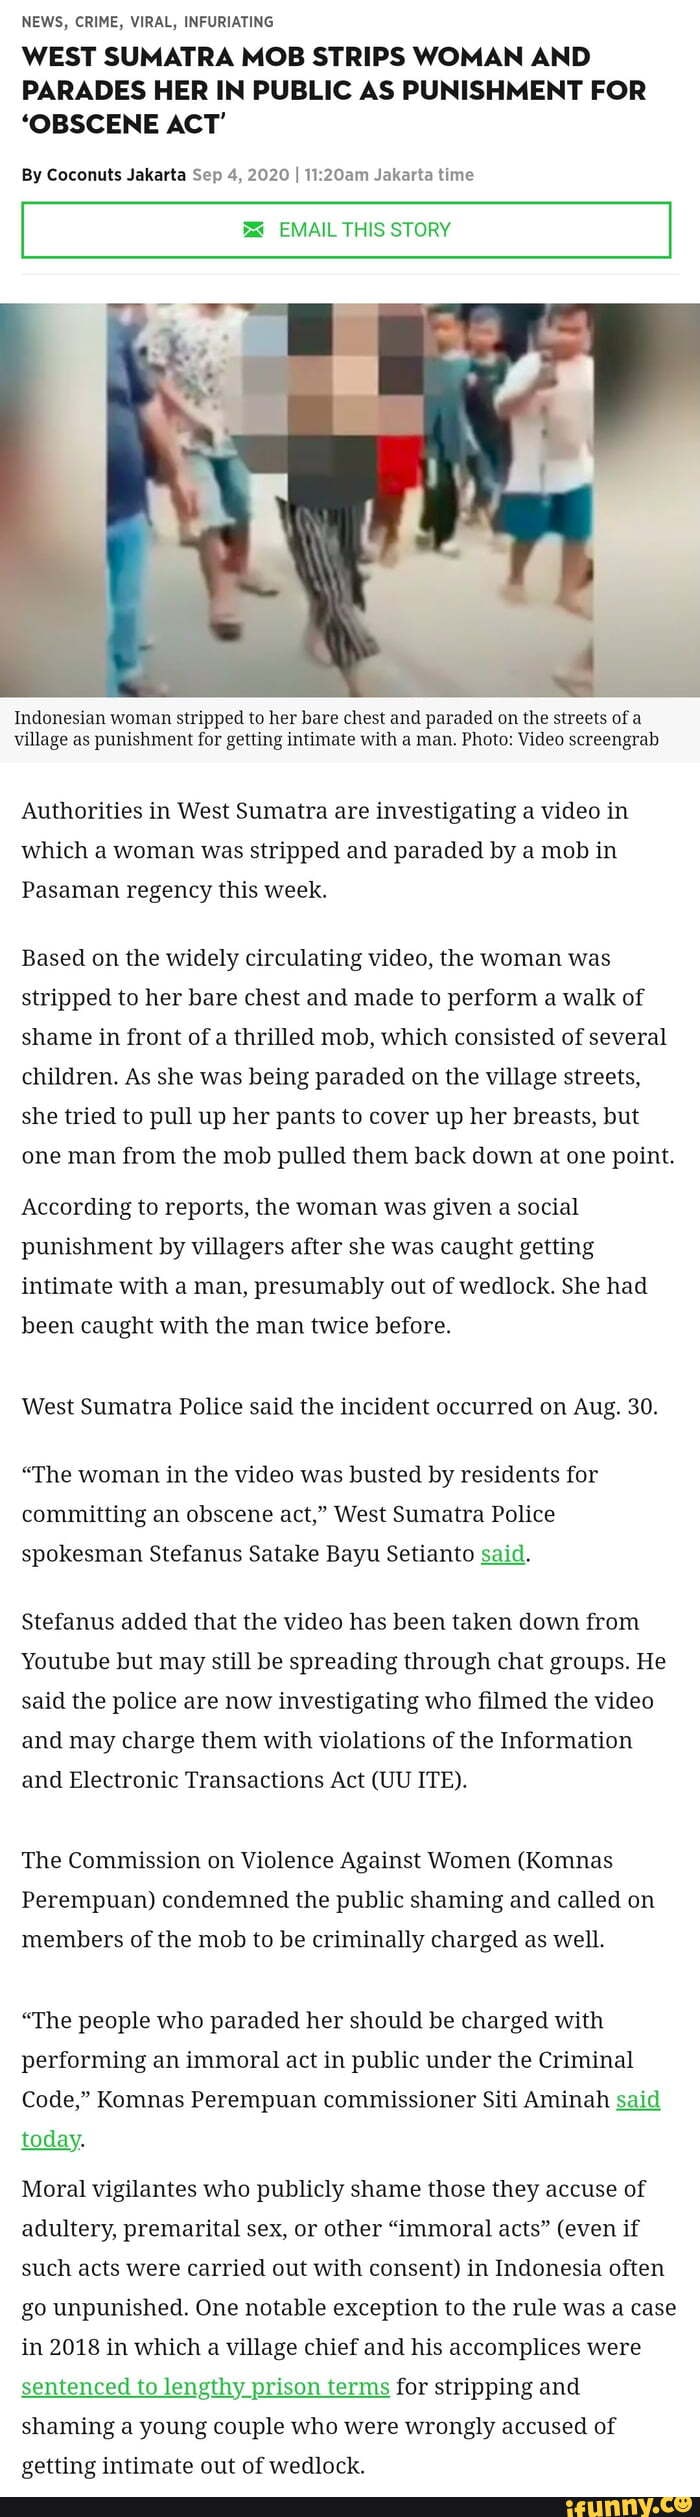 NEWS, CRIME, VIRAL, INFURIATING WEST SUMATRA MOB STRIPS WOMAN AND PARADES HER IN PUBLIC AS PUNISHMENT